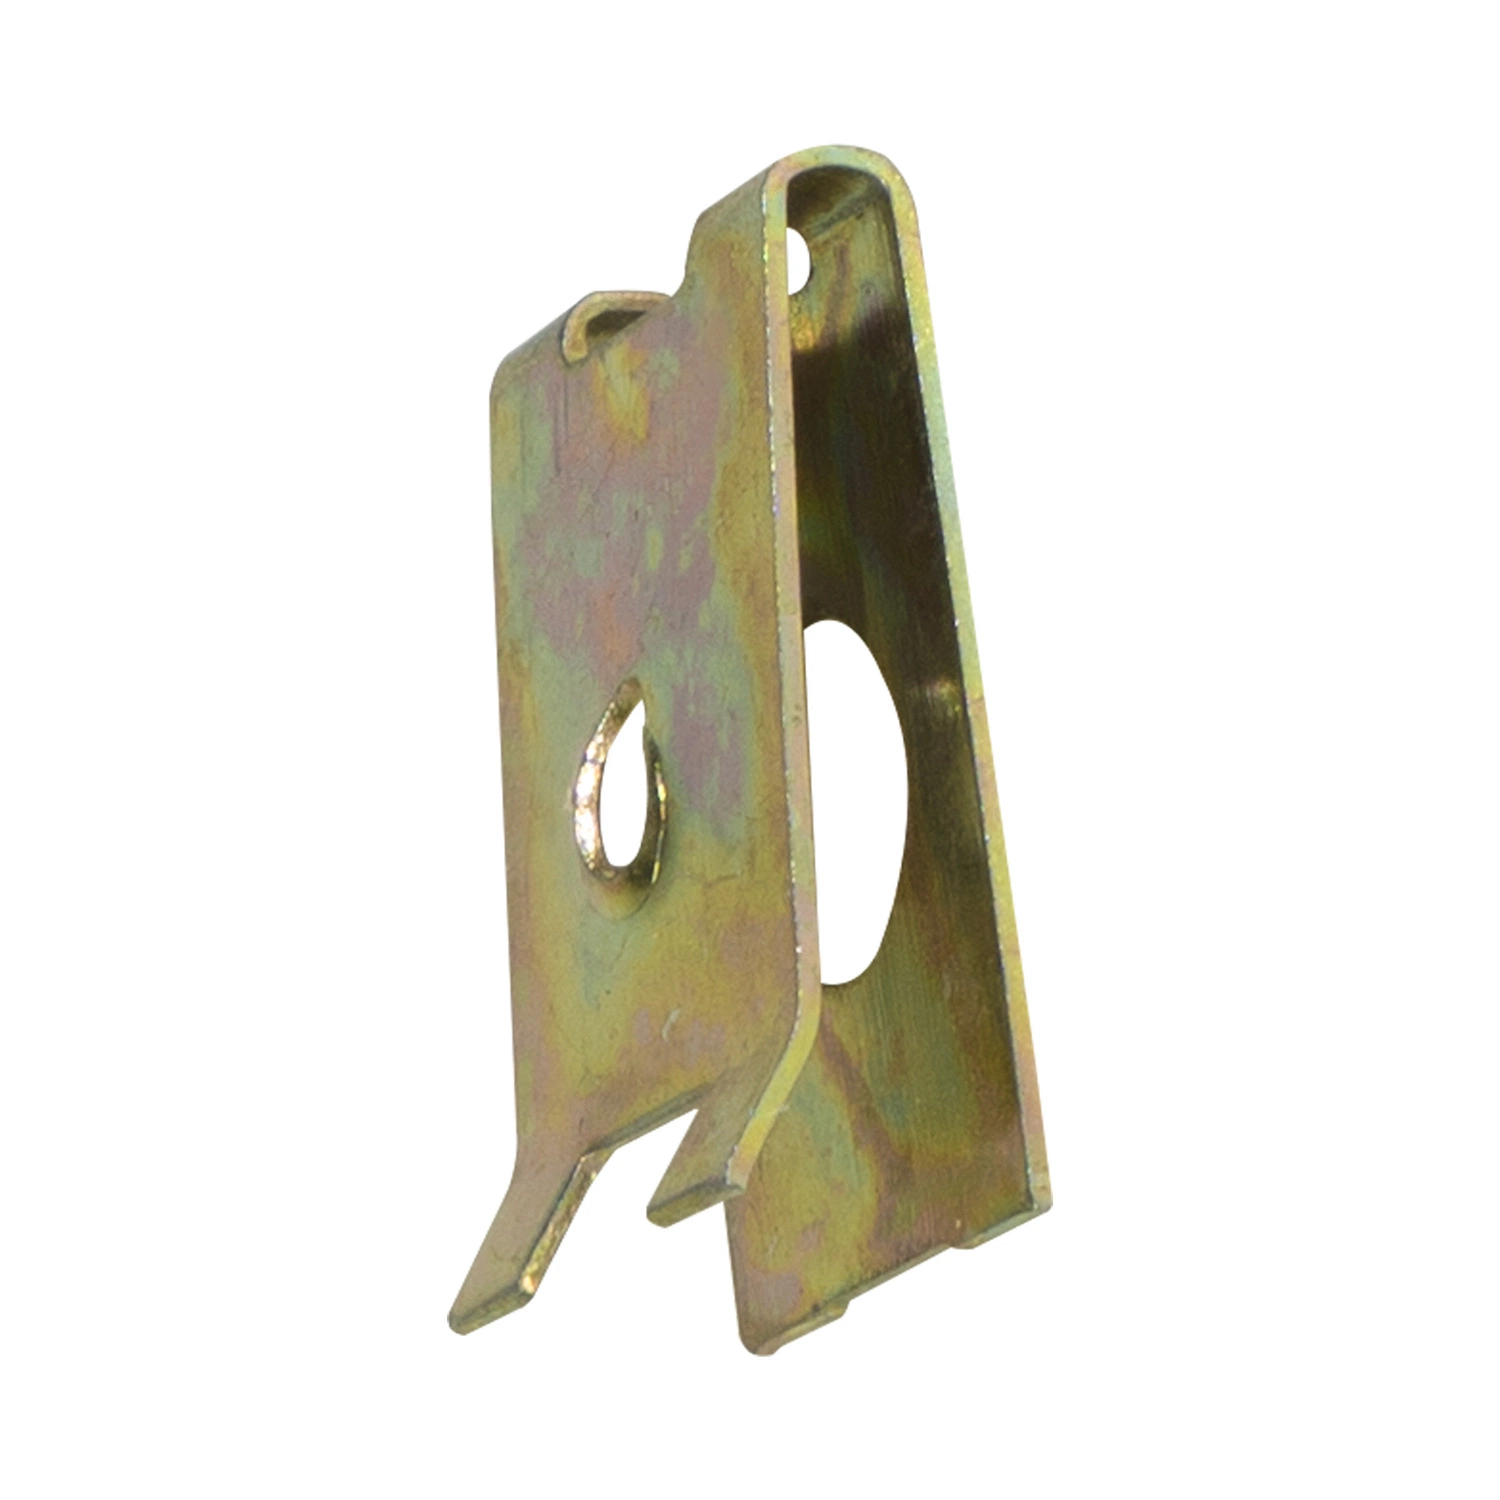 Excellent Quality CNC Sheet Metal Stamping Parts for Mobile Phone Parts Powder Coating Equipment for Metal Bracket